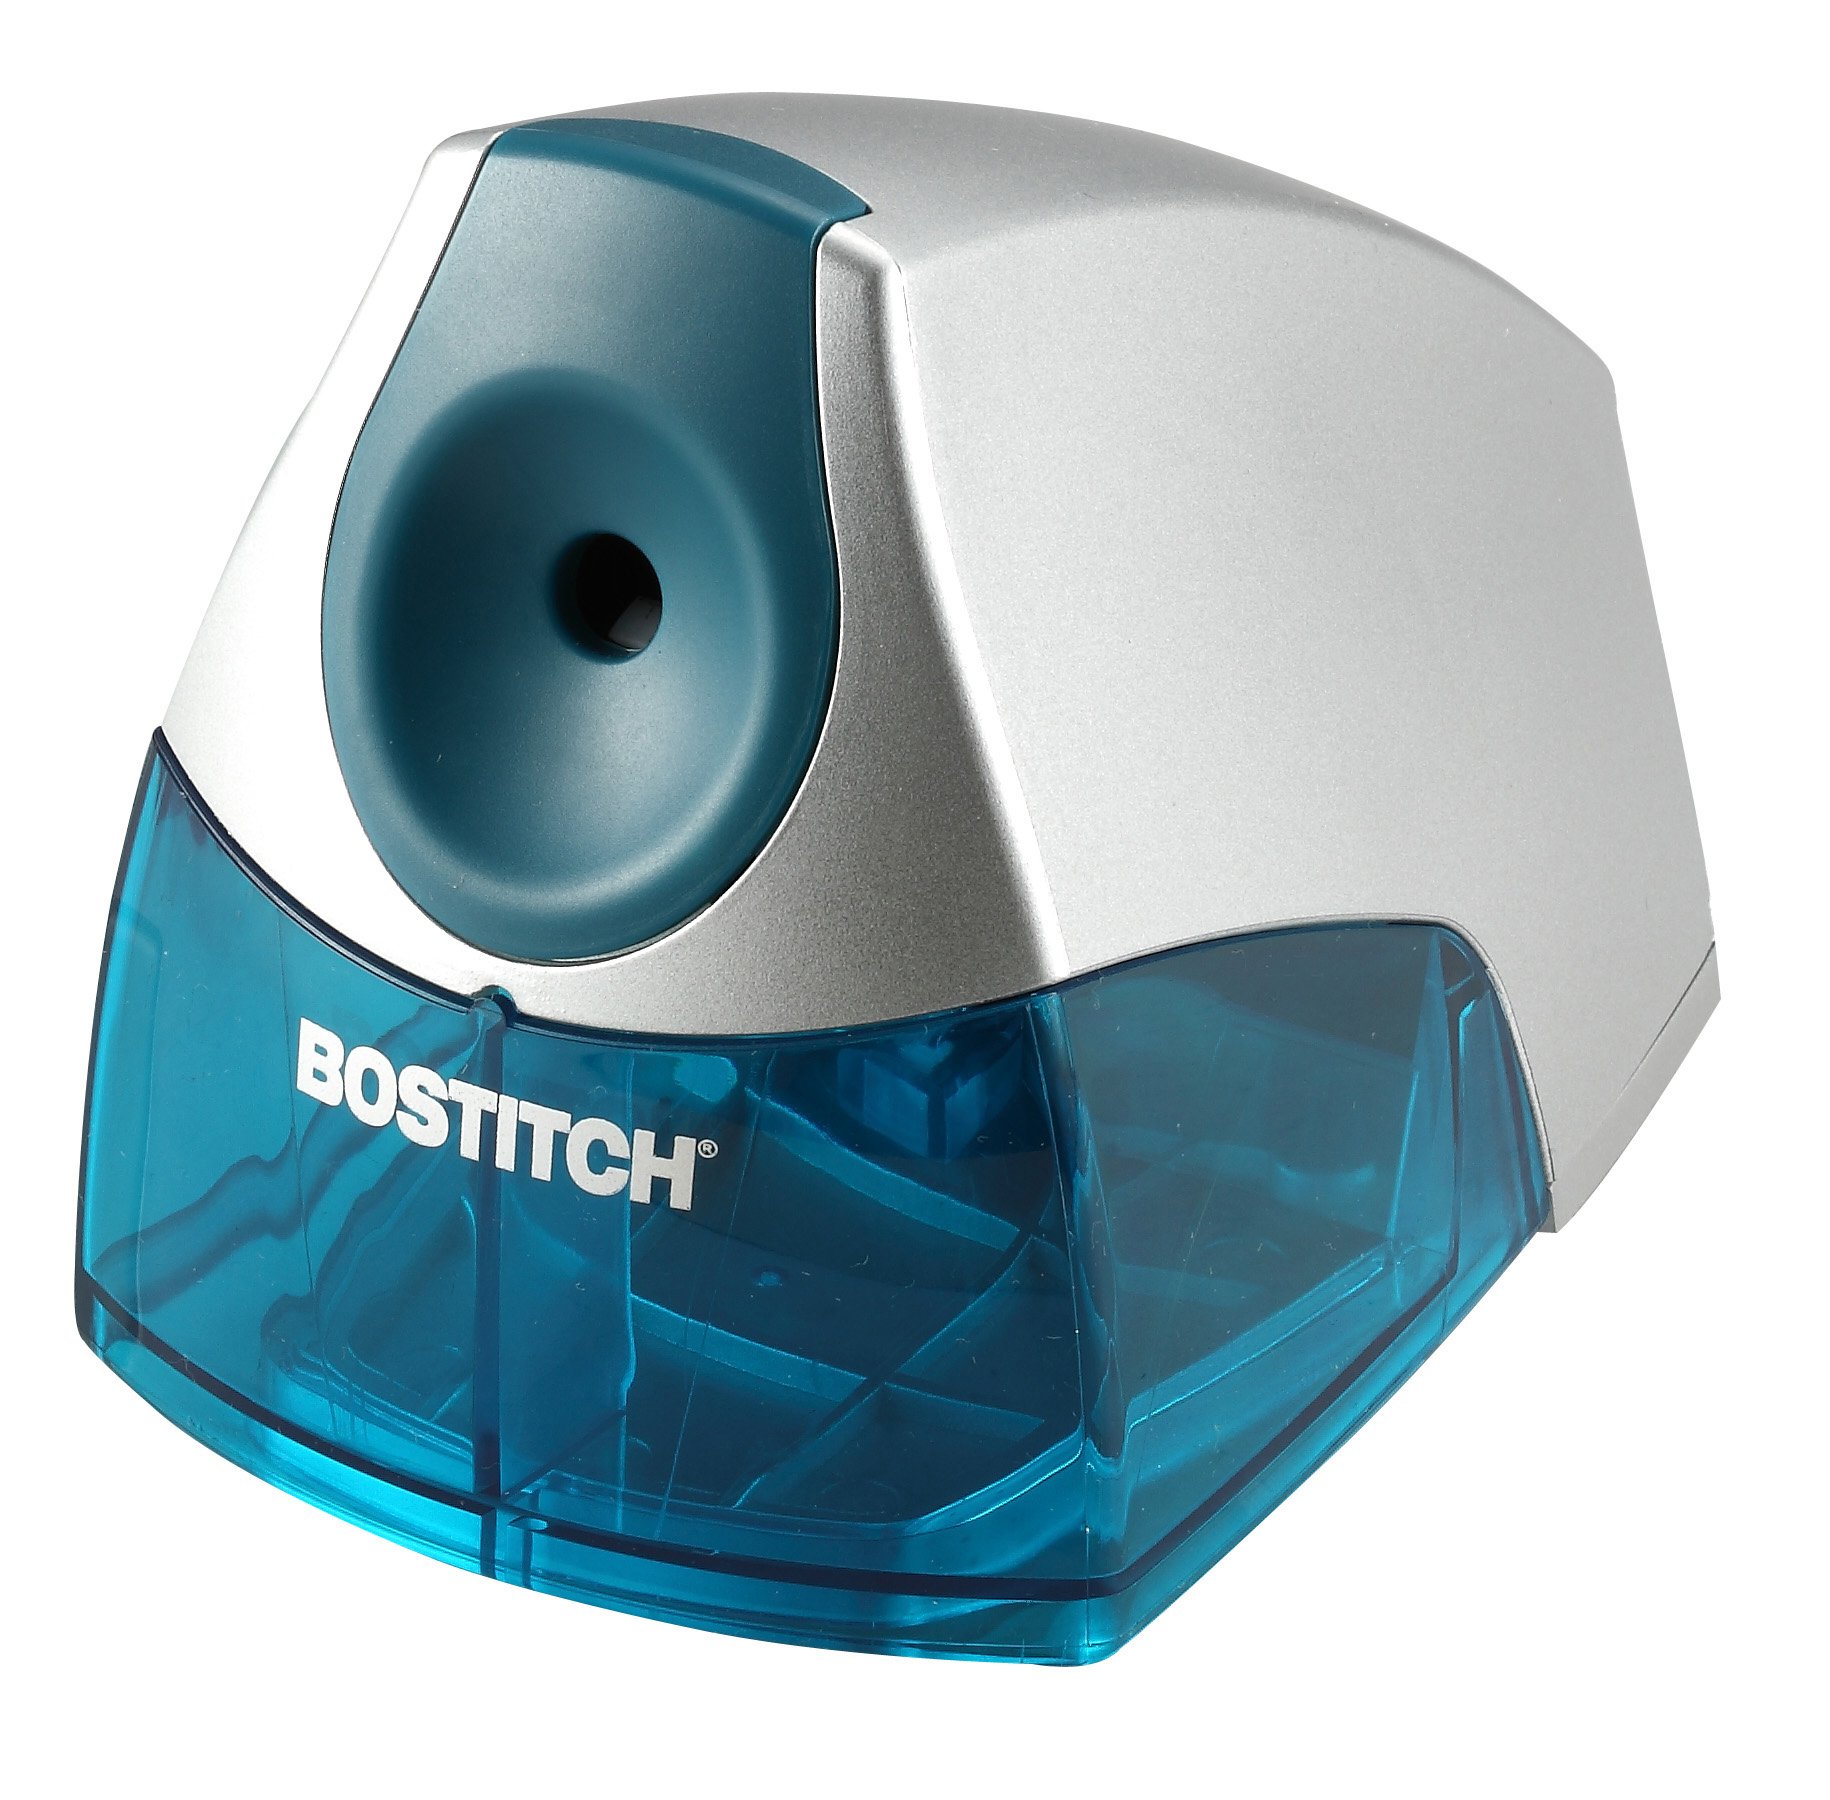 Bostitch Personal Electric Pencil Sharpener - HHC Cutter Tech, Stall-Free Motor, High Capacity Tray, 7yr Warranty (EPS4-BLUE)